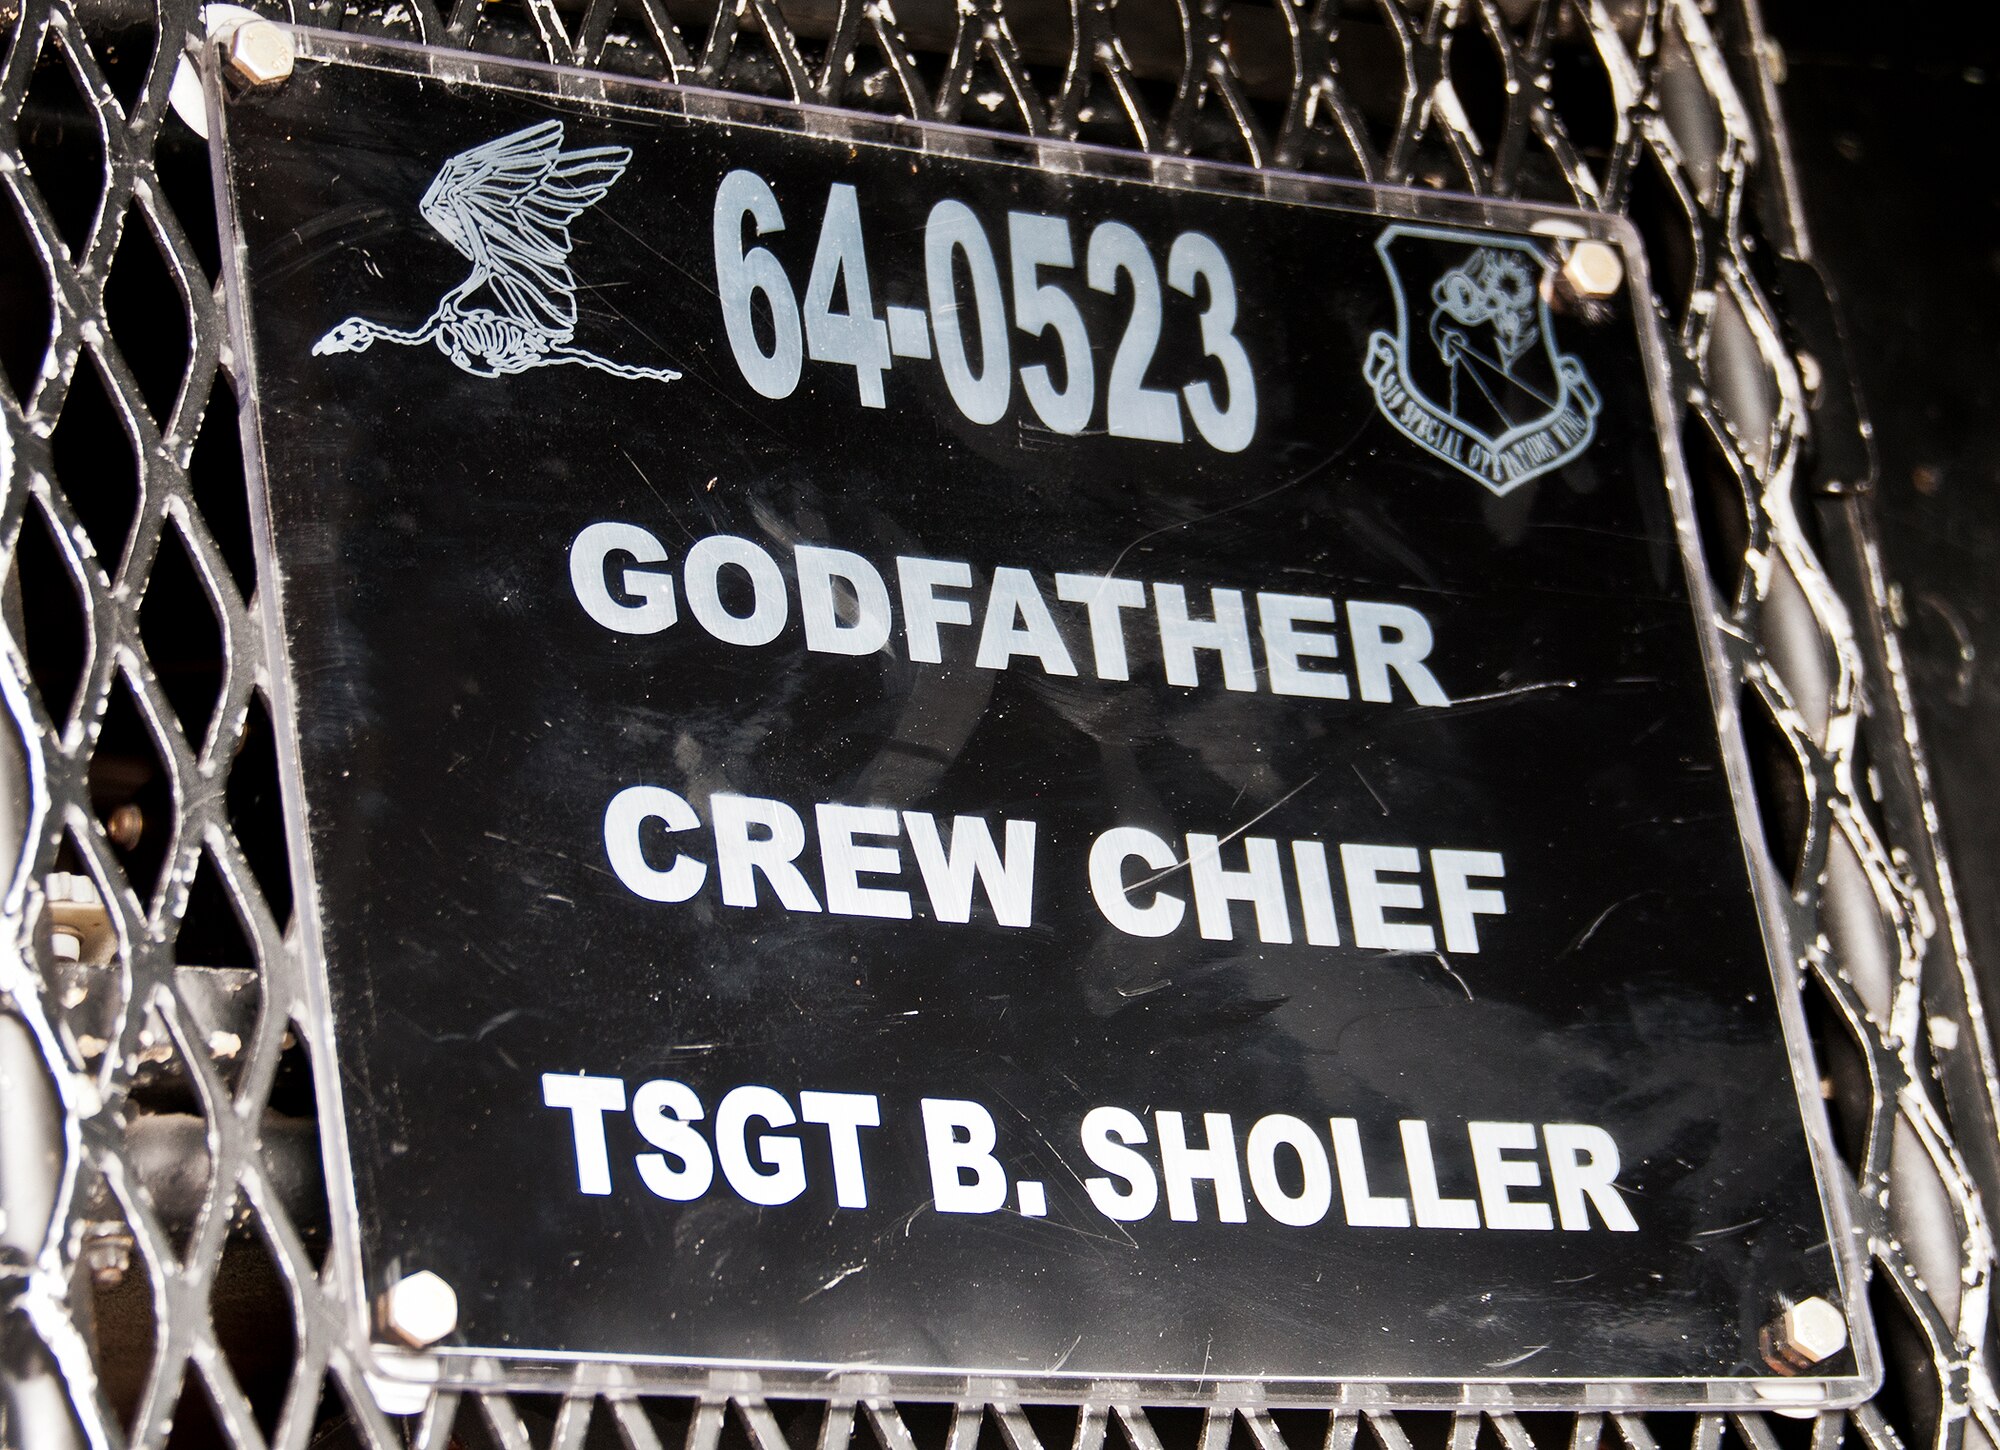 Aircraft 64-0523’s name plate shows the aircraft’s nickname and the current crew chief.  The aircraft never officially had a nickname until it was given the name “Godfather” by Rick Andreozzi, who was its first crew chief when it arrived to Duke Field in 2000.  0523 lead the Air Force’s assault force during the Son Tay Raid to rescue prisoners of war in Vietnam in 1970.  (U.S. Air Force photo/Tech. Sgt. Samuel King Jr.)